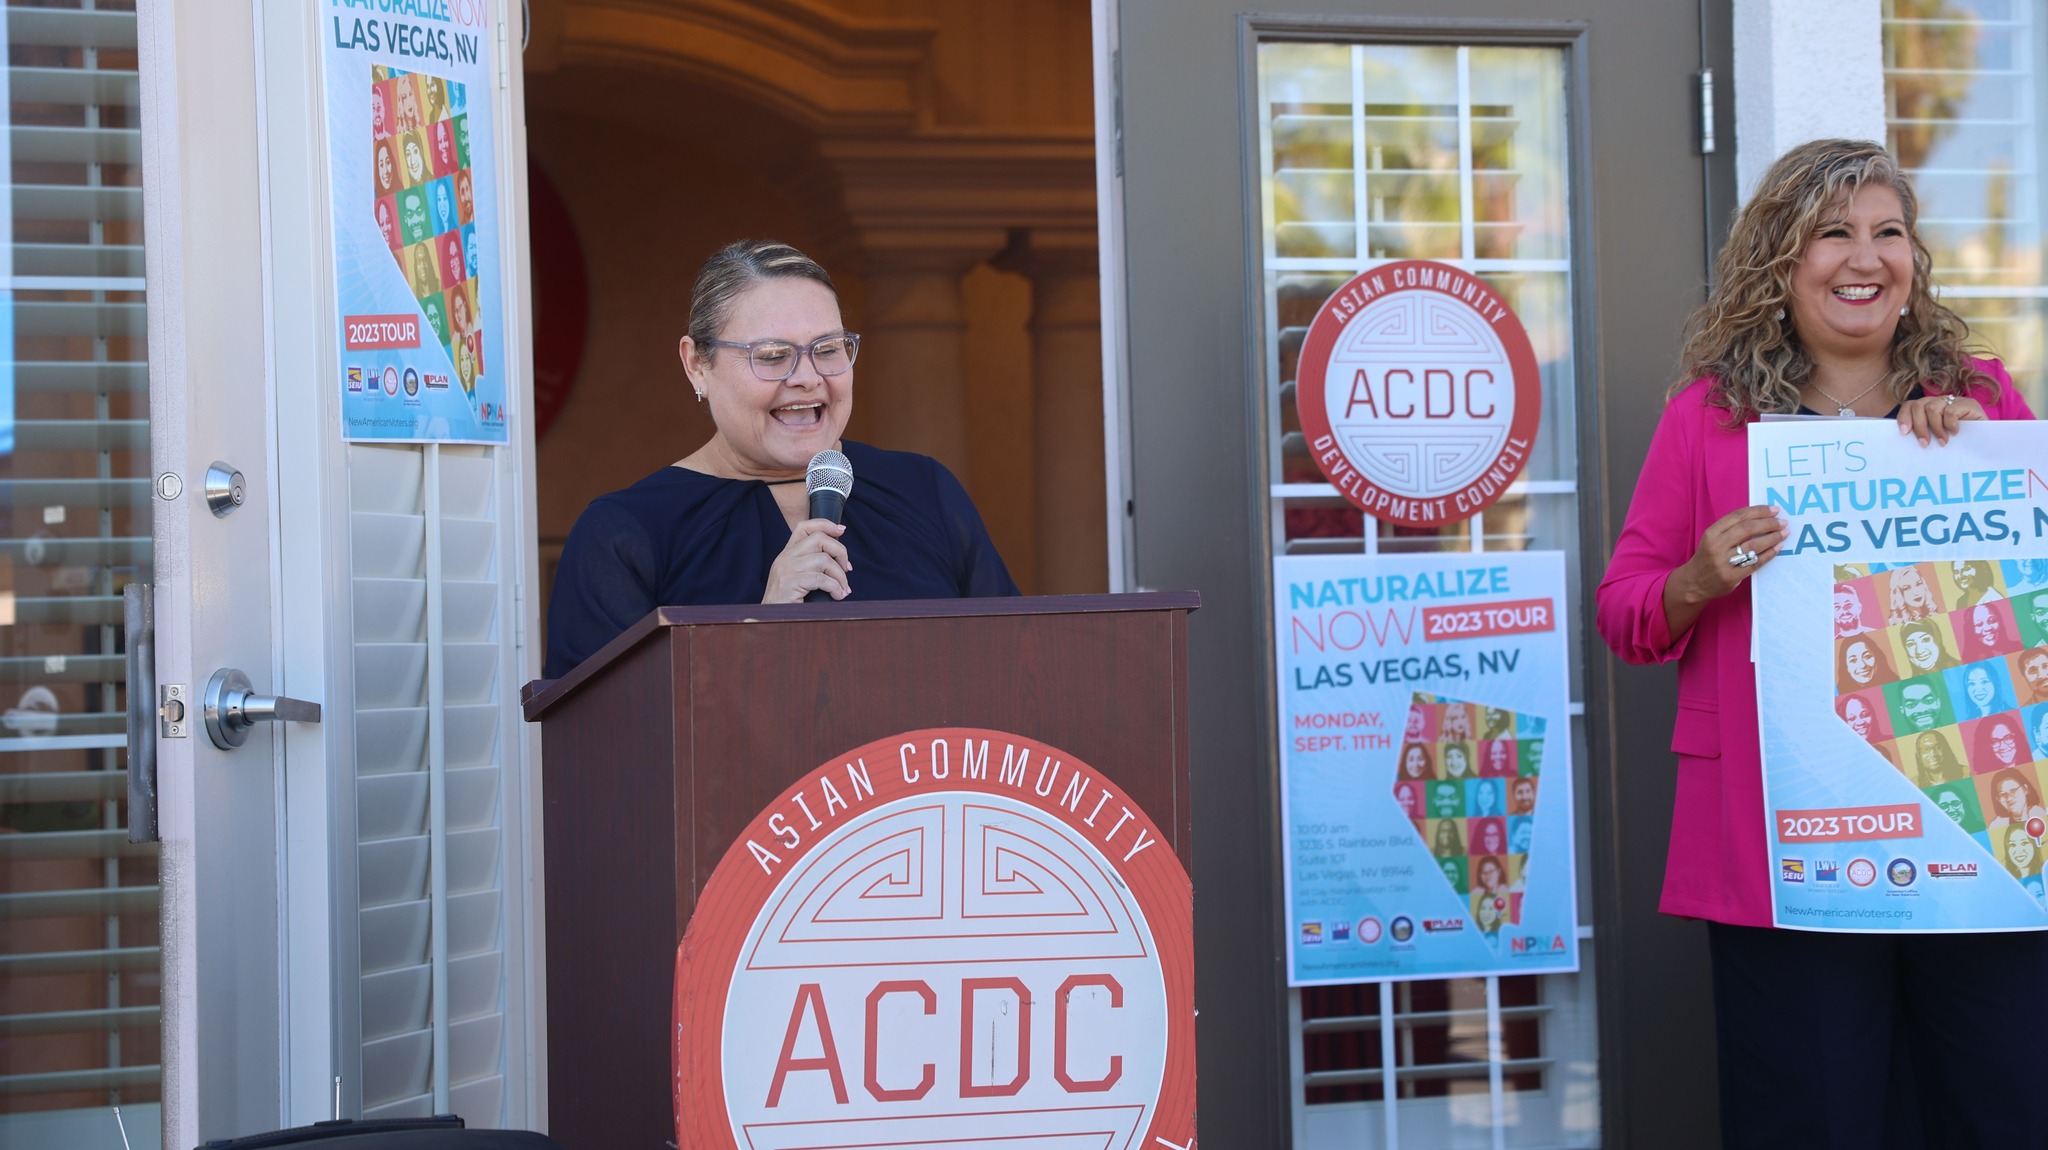 Palmira stands behind a podium with red and white ACDC Logo.